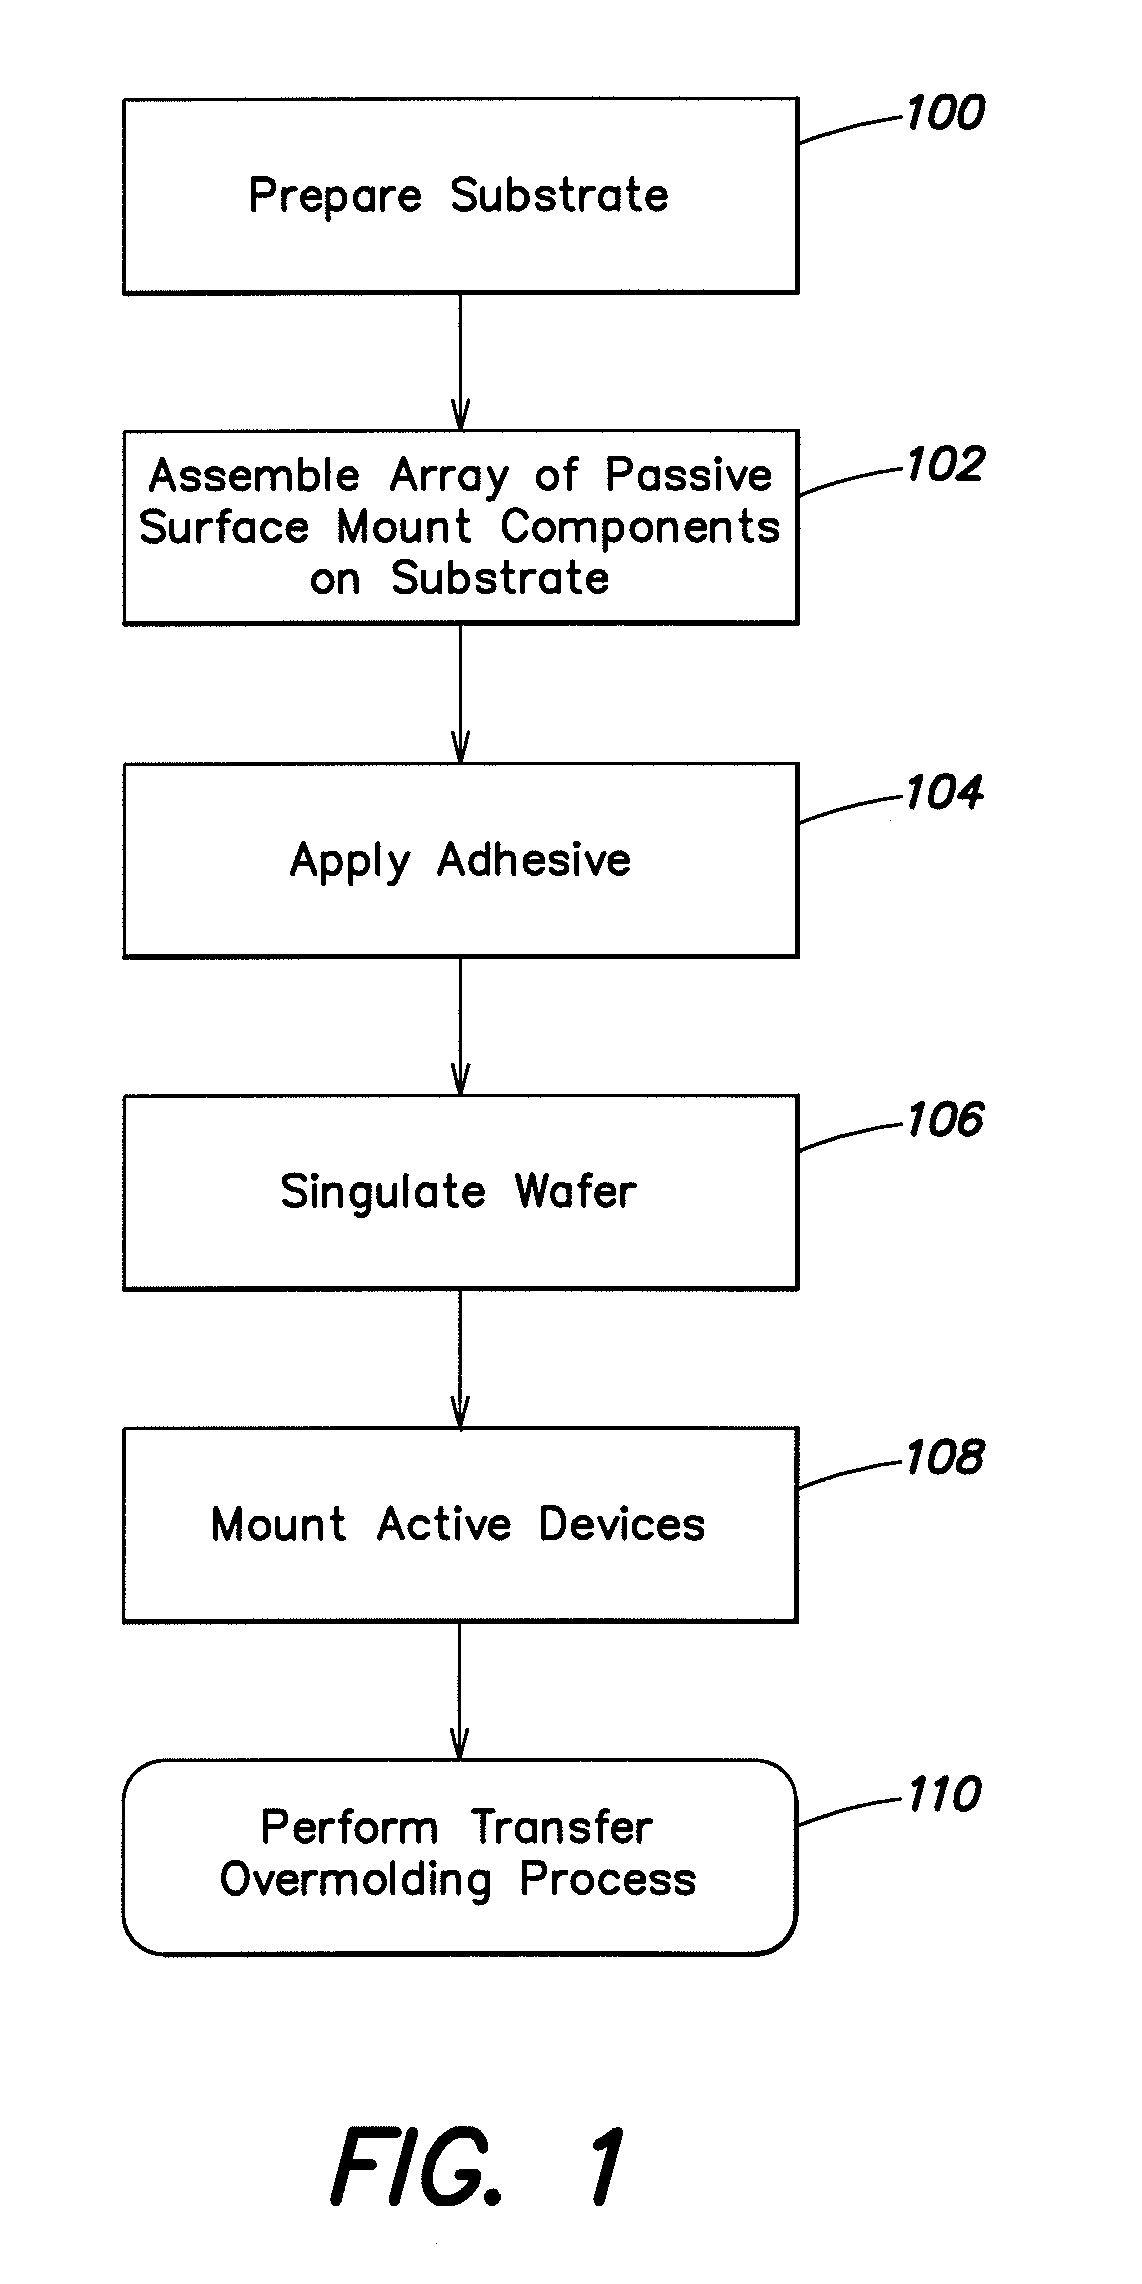 3-d stacking of active devices over passive devices